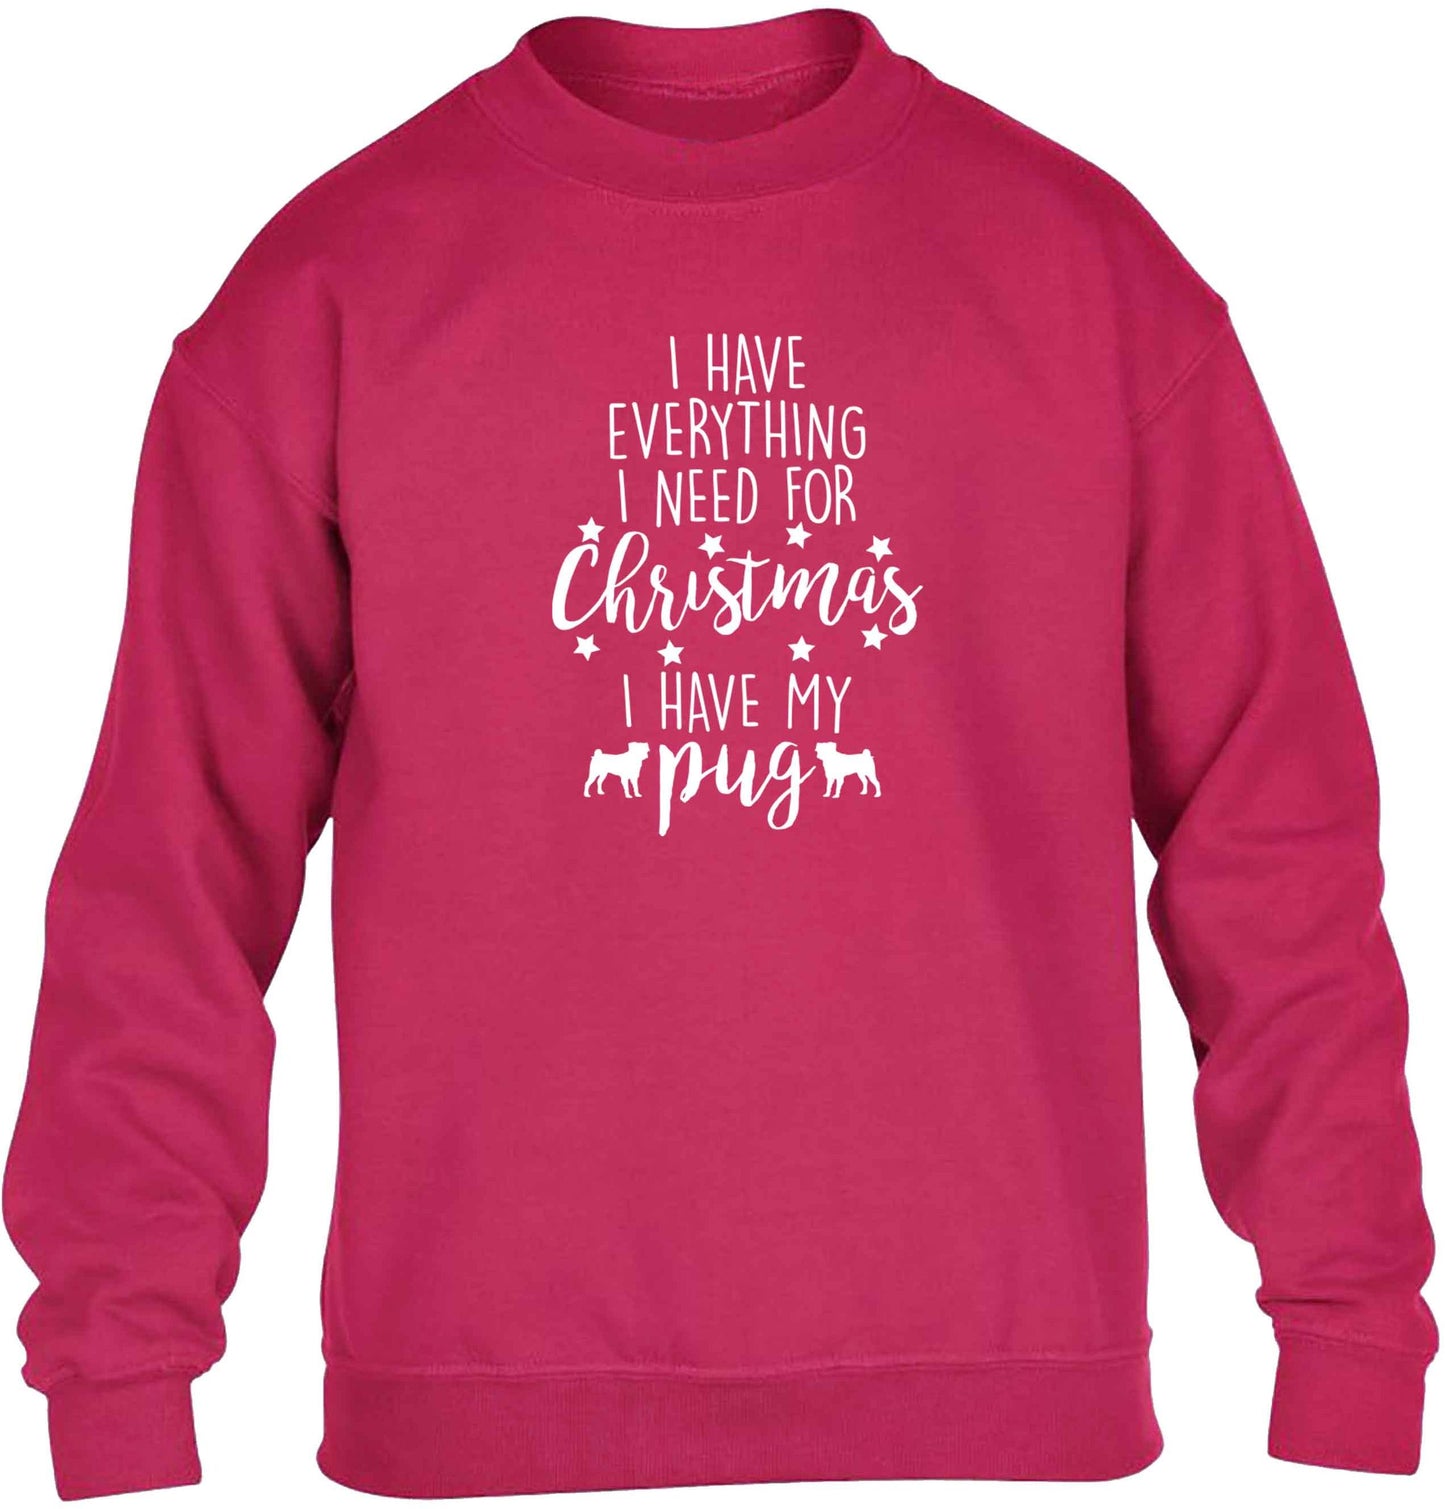 I have everything I need for Christmas I have my pug children's pink sweater 12-13 Years